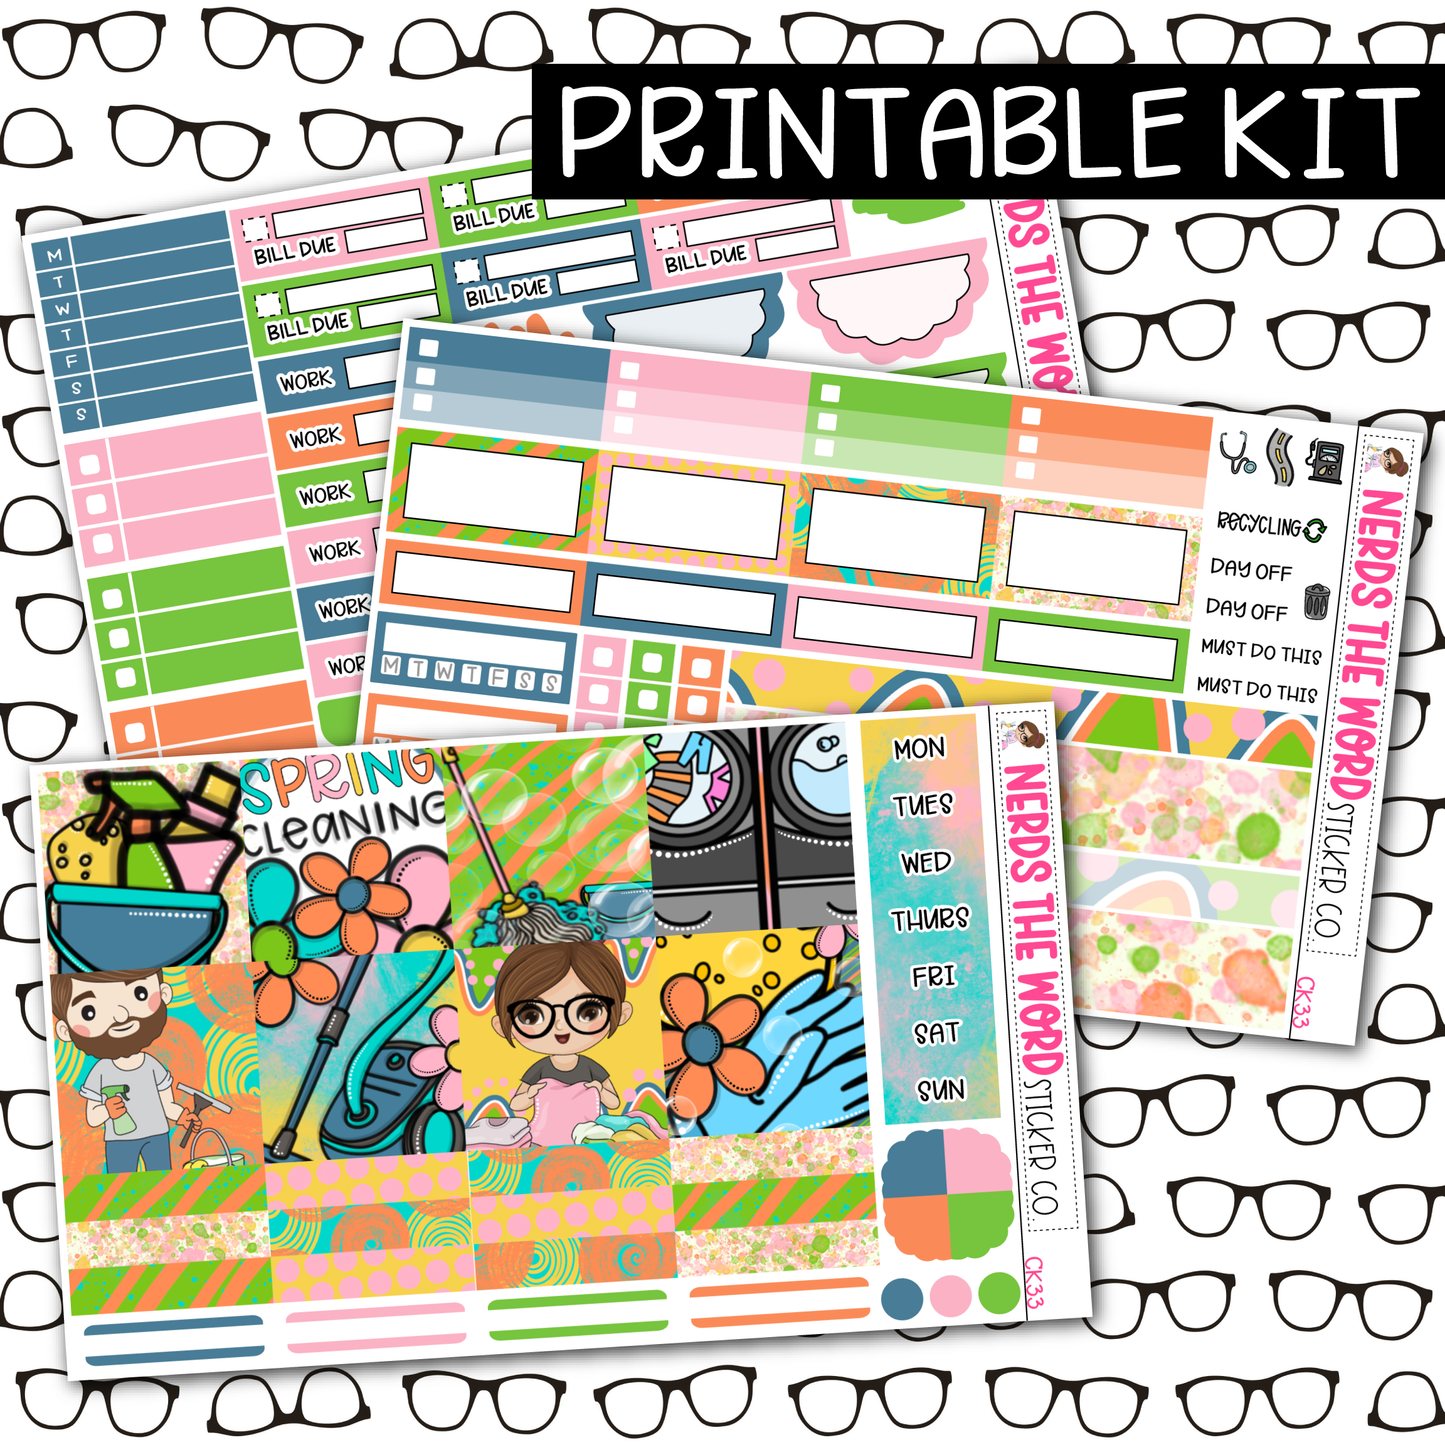 PRINTABLE Spring Cleaning Weekly Kit - Choose your Size